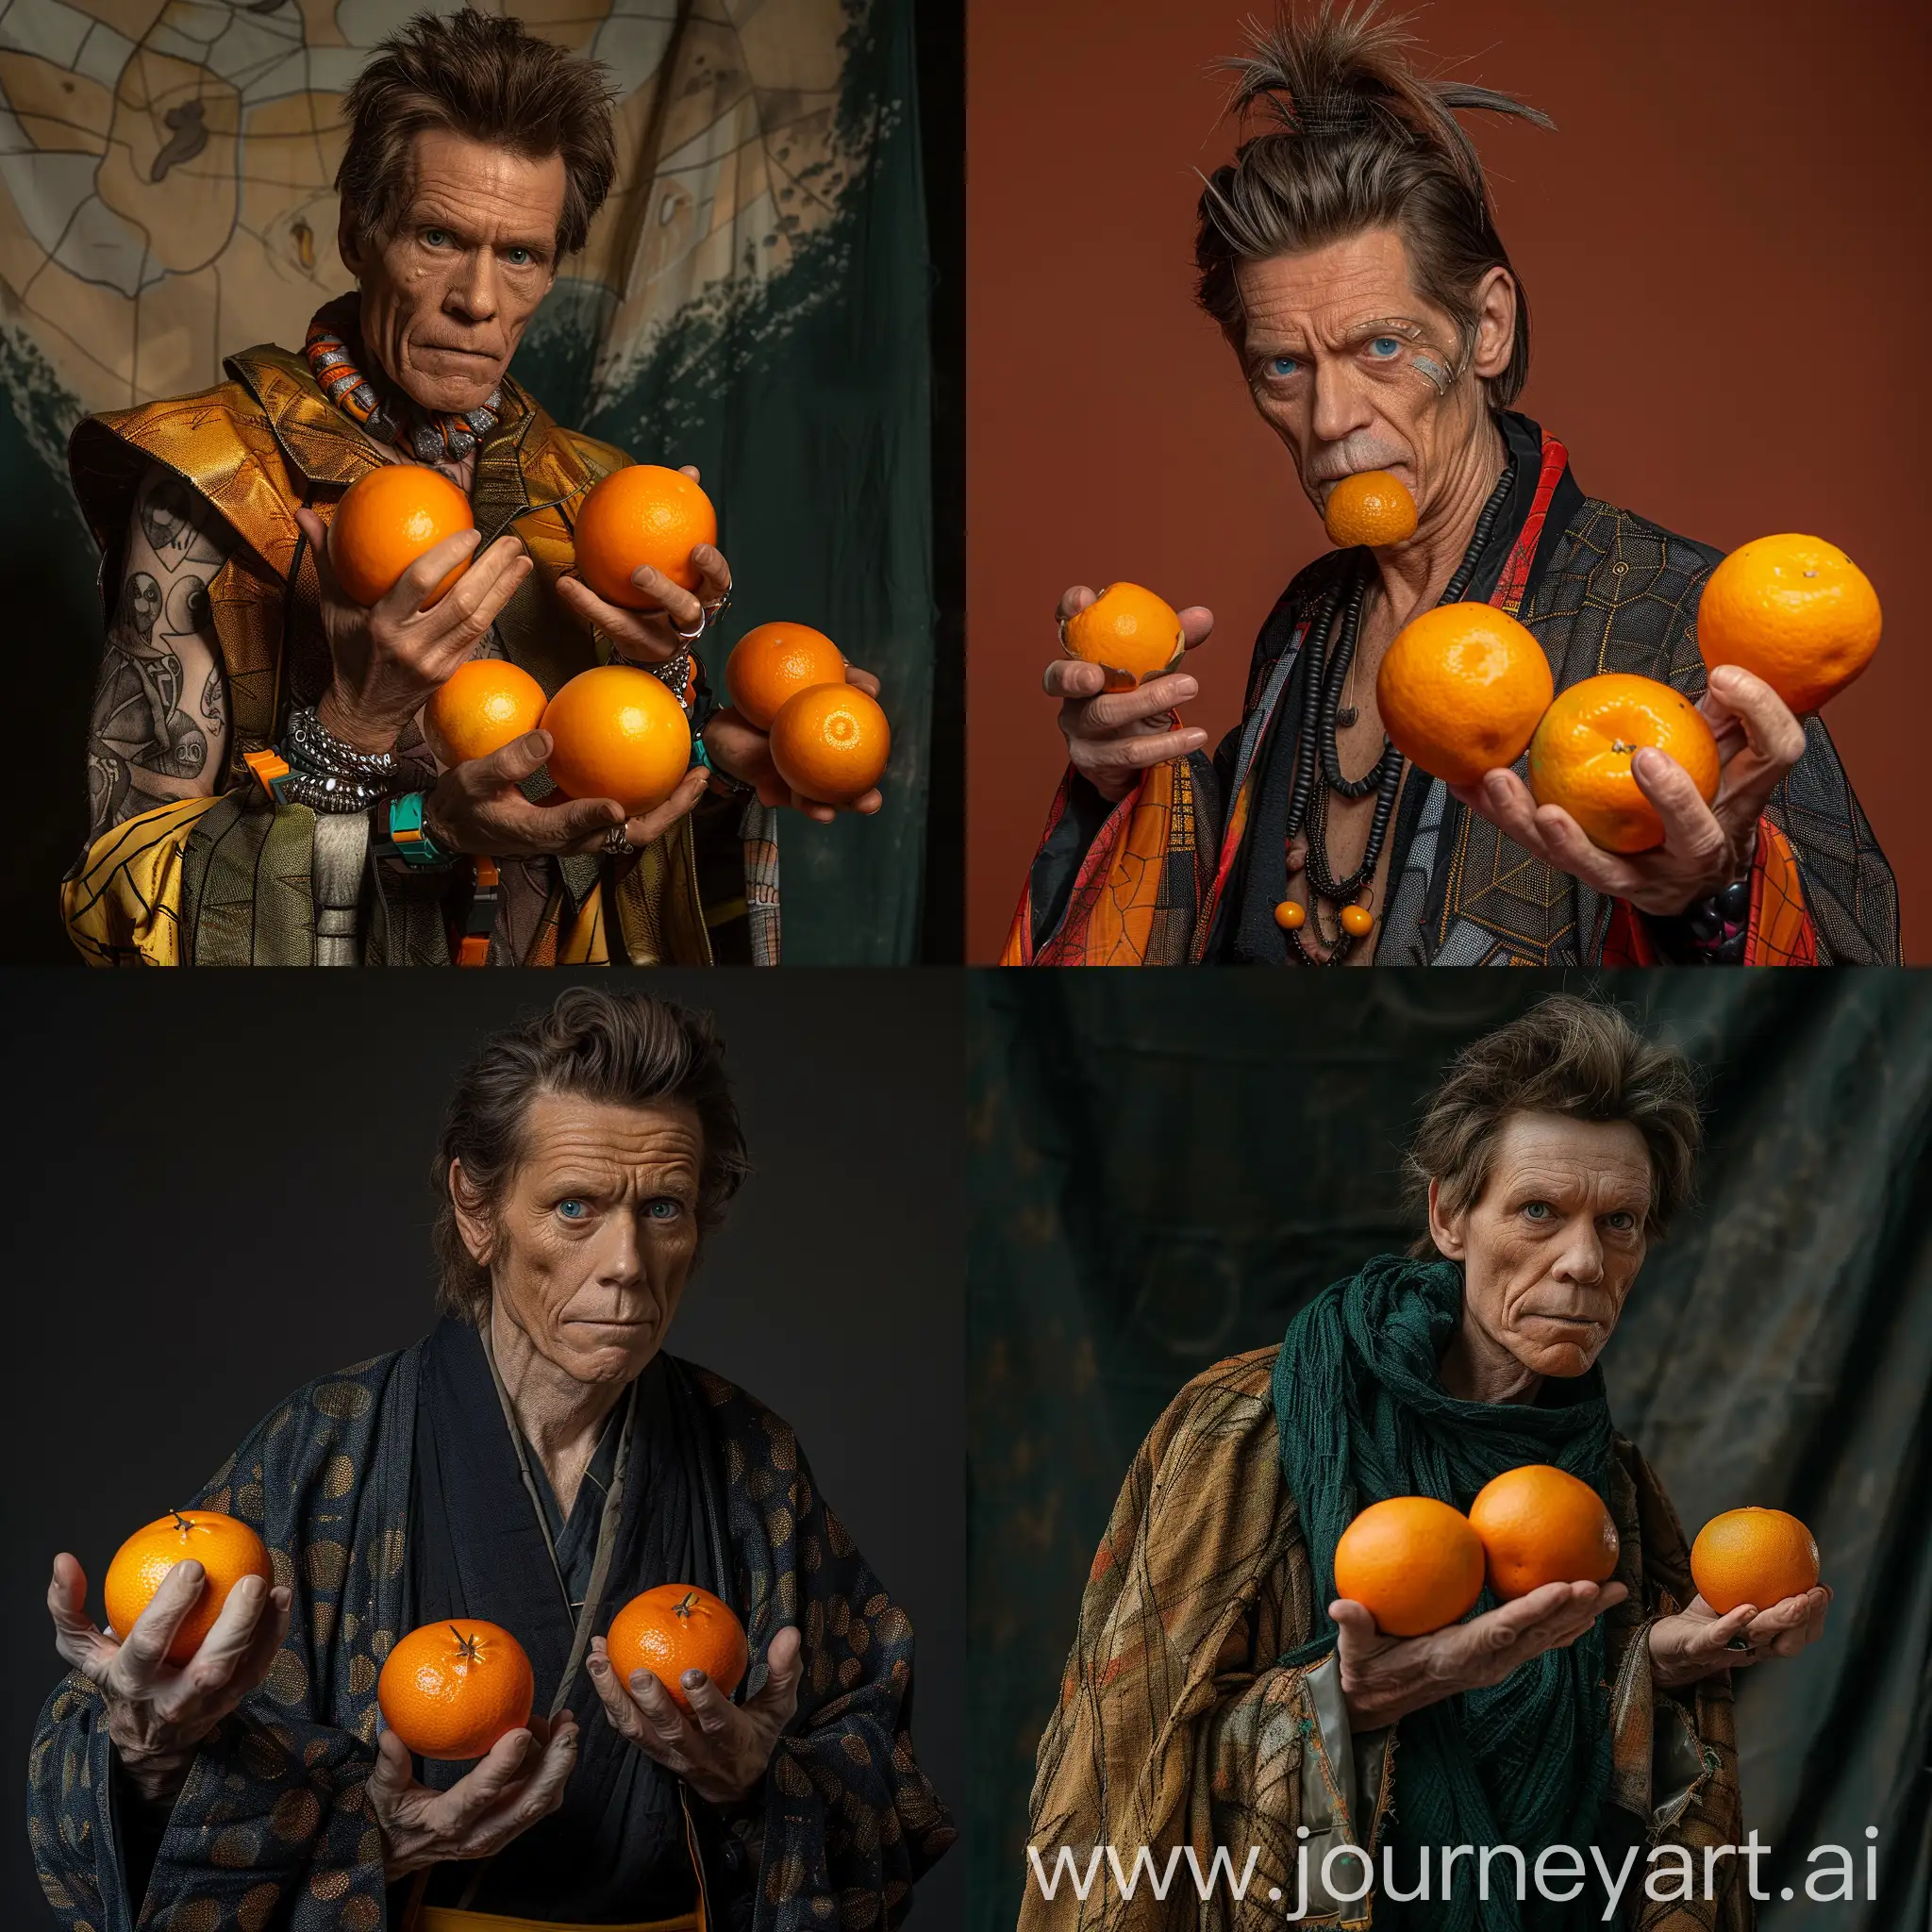 William-Dafoe-Cosplaying-as-Enki-from-Fear-While-Holding-Oranges